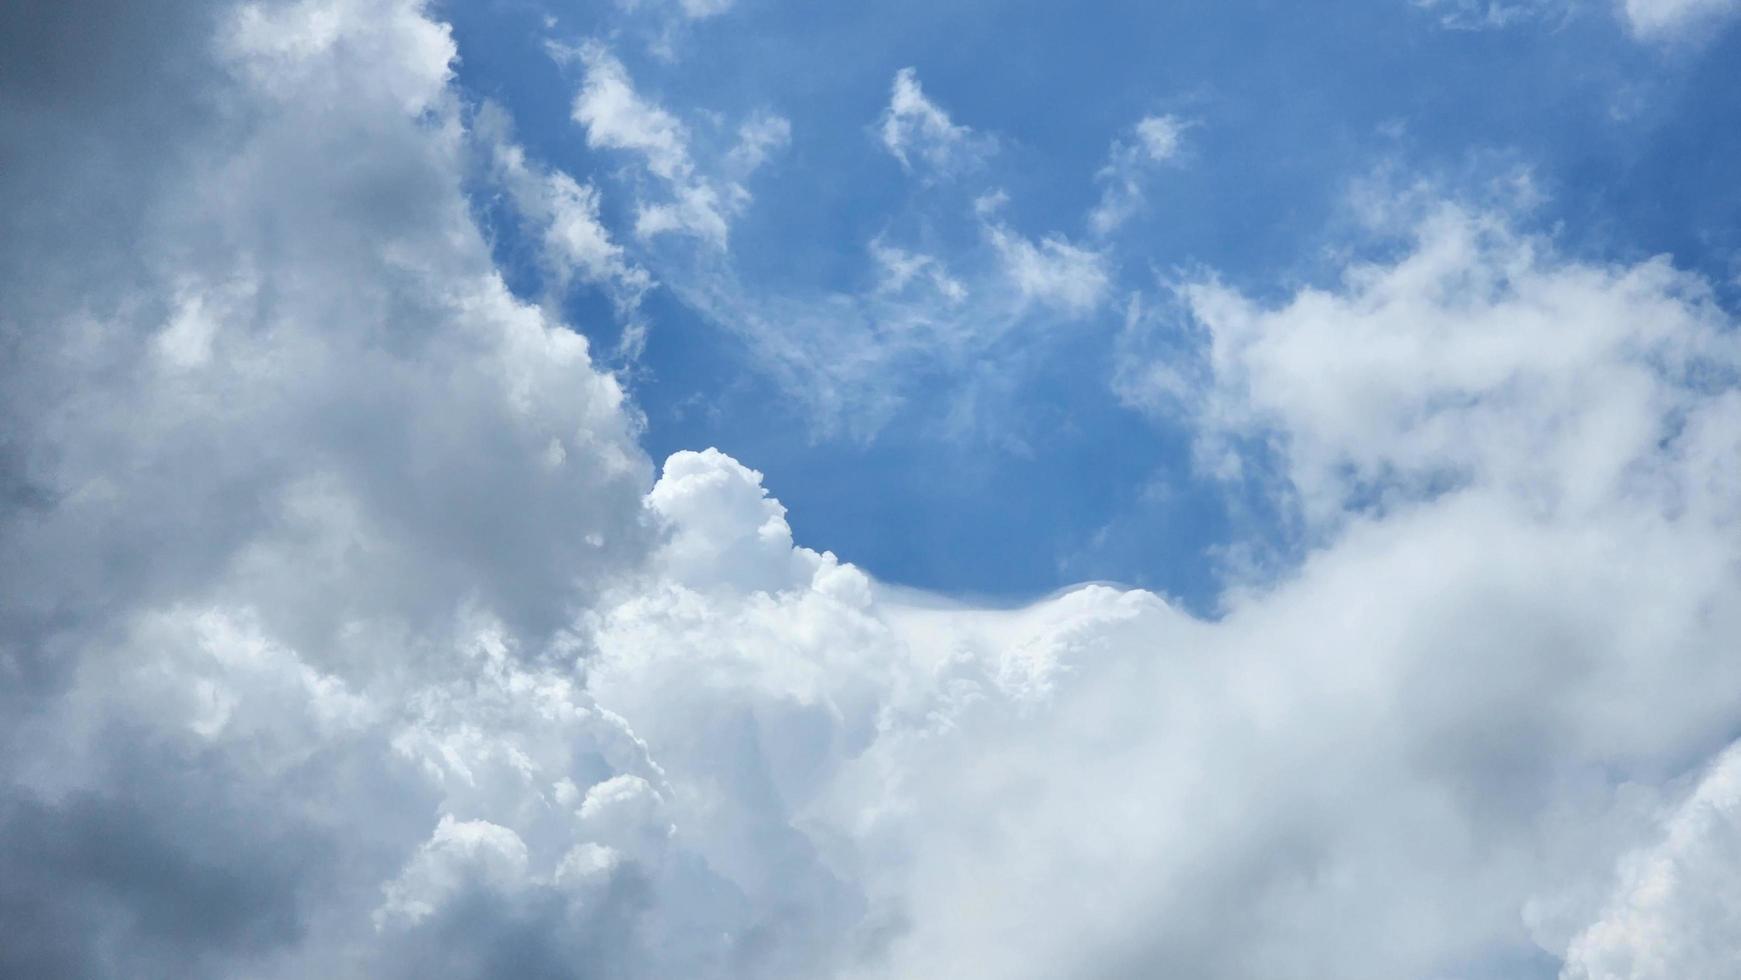 Cloud Wallpaper Stock Photos, Images and Backgrounds for Free Download